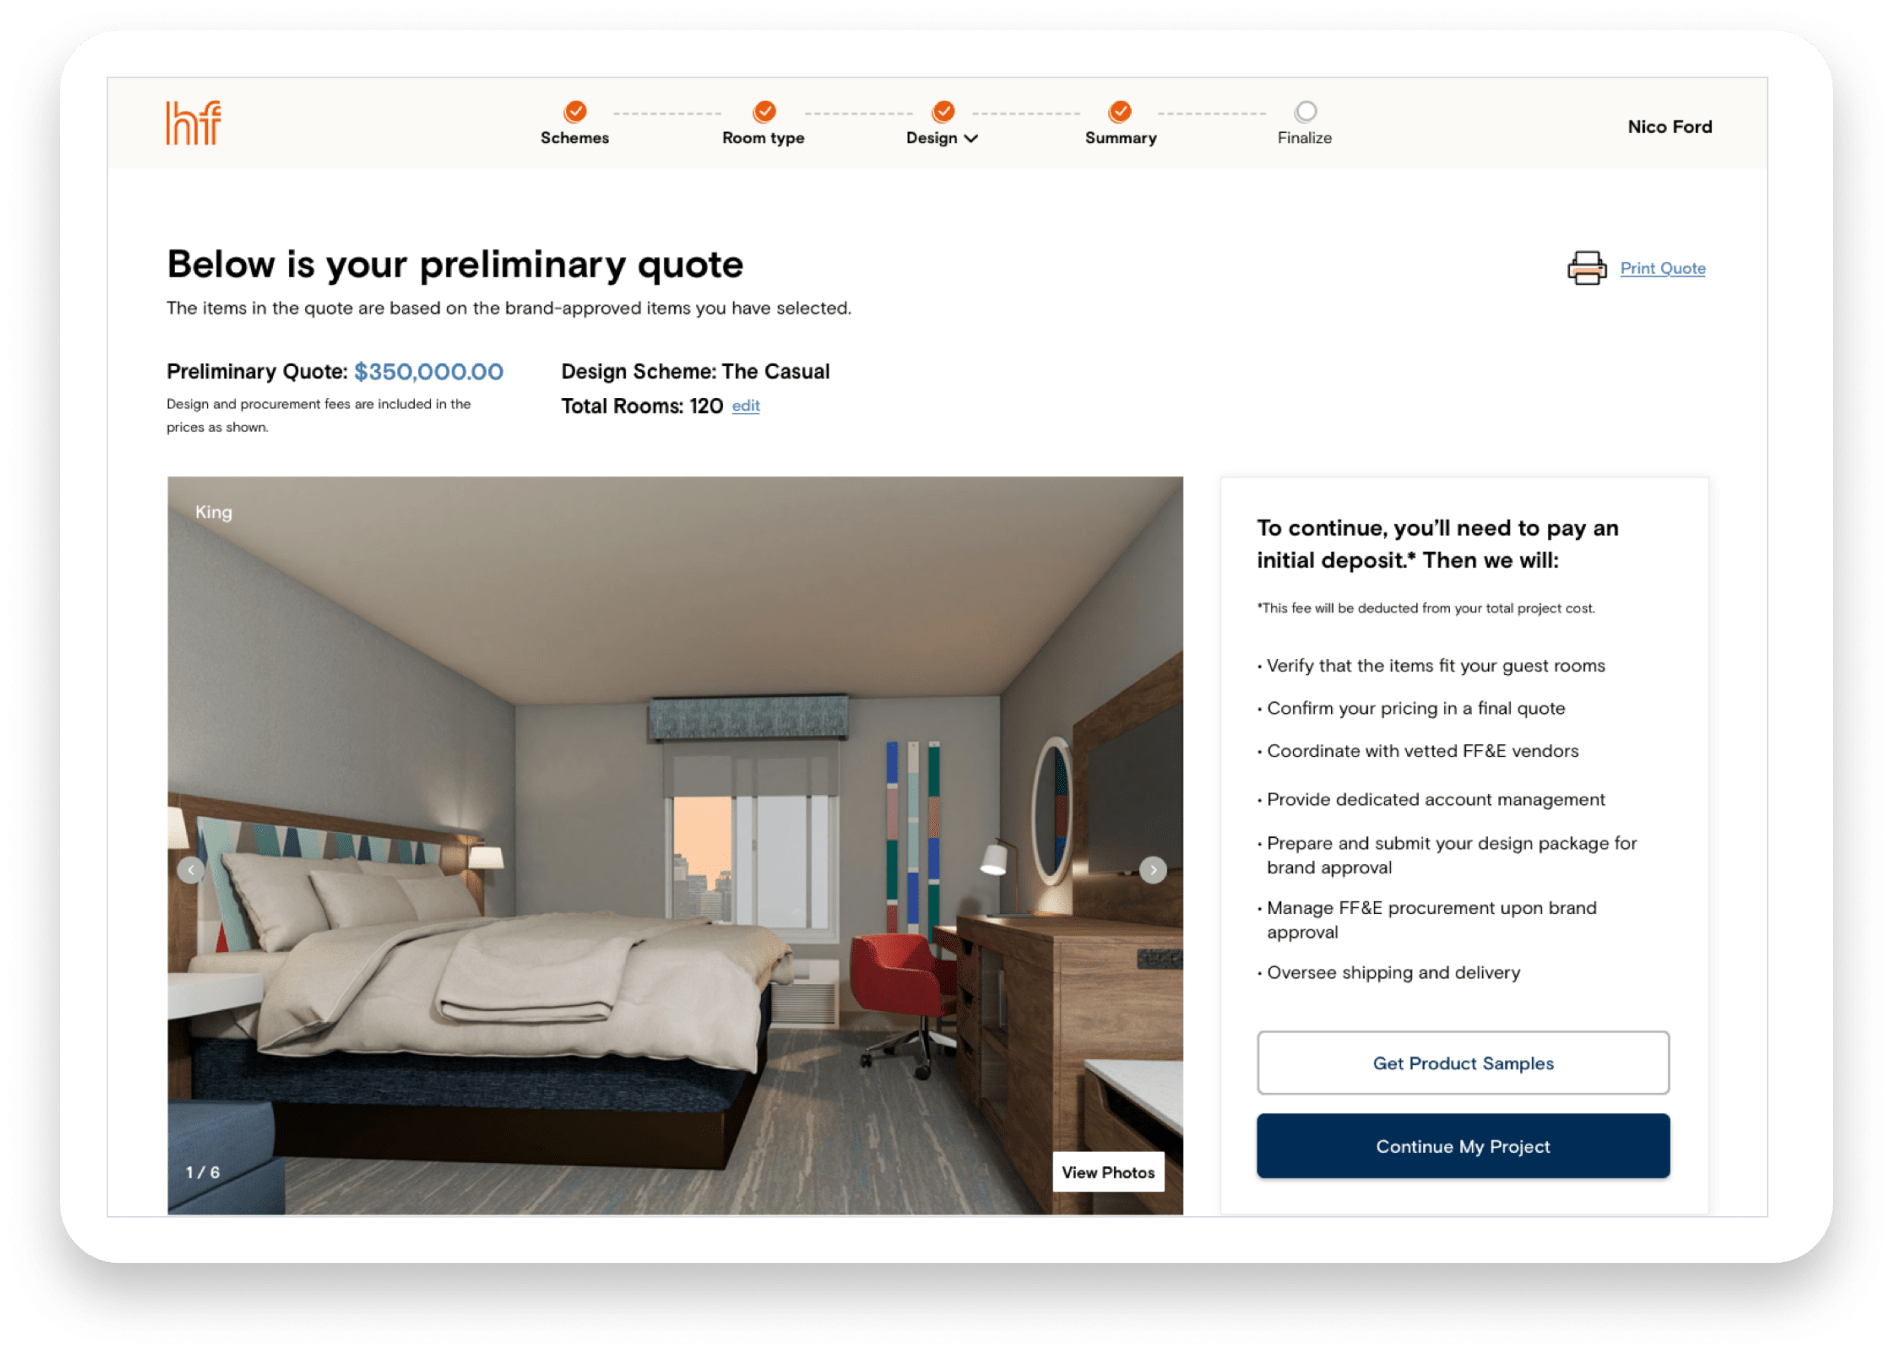 Rendering of the customer's room in real time